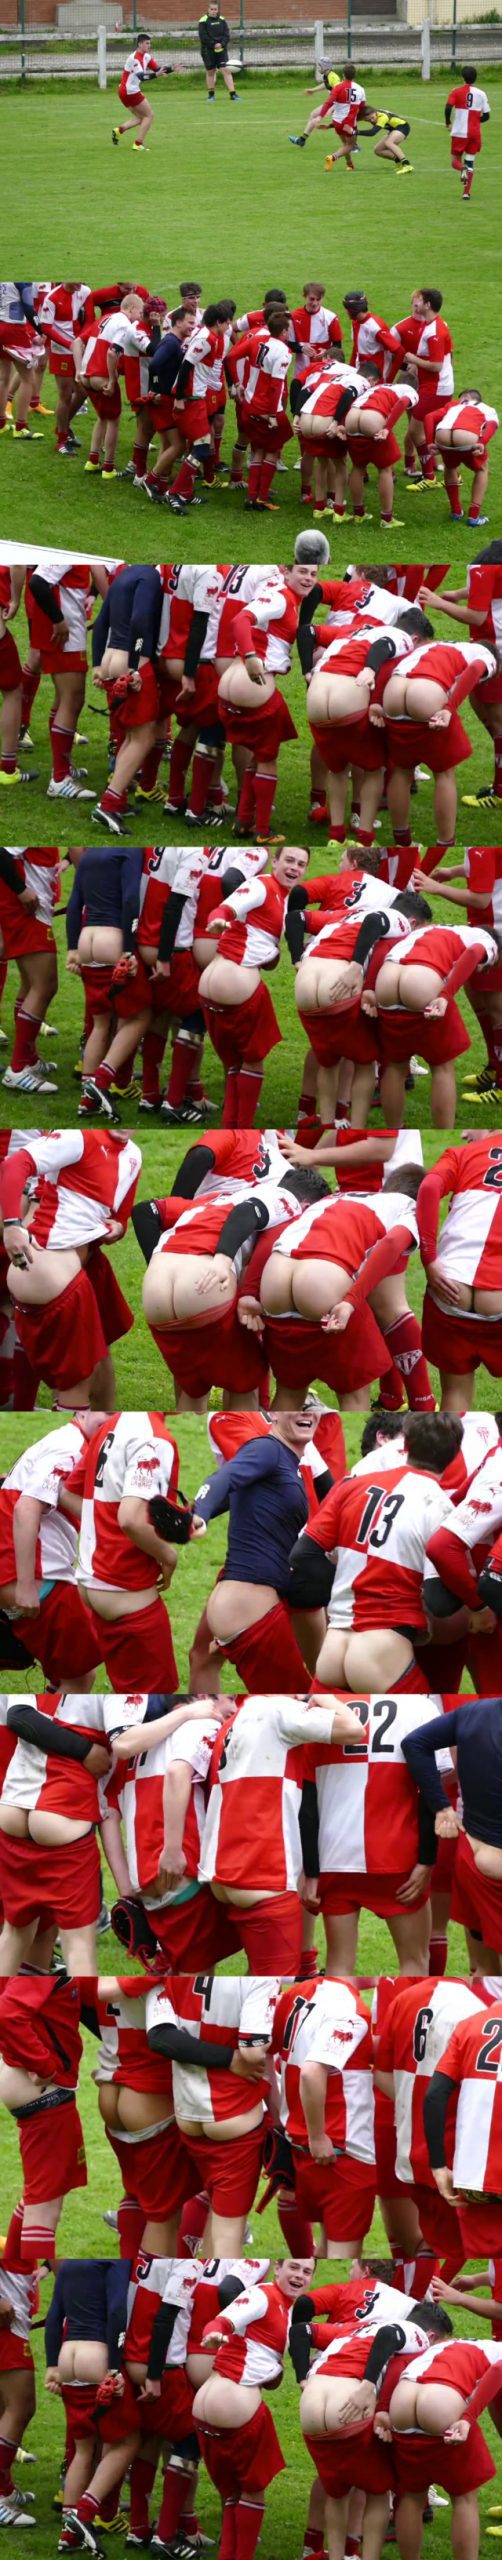 ruggers flashing asses at the end of game